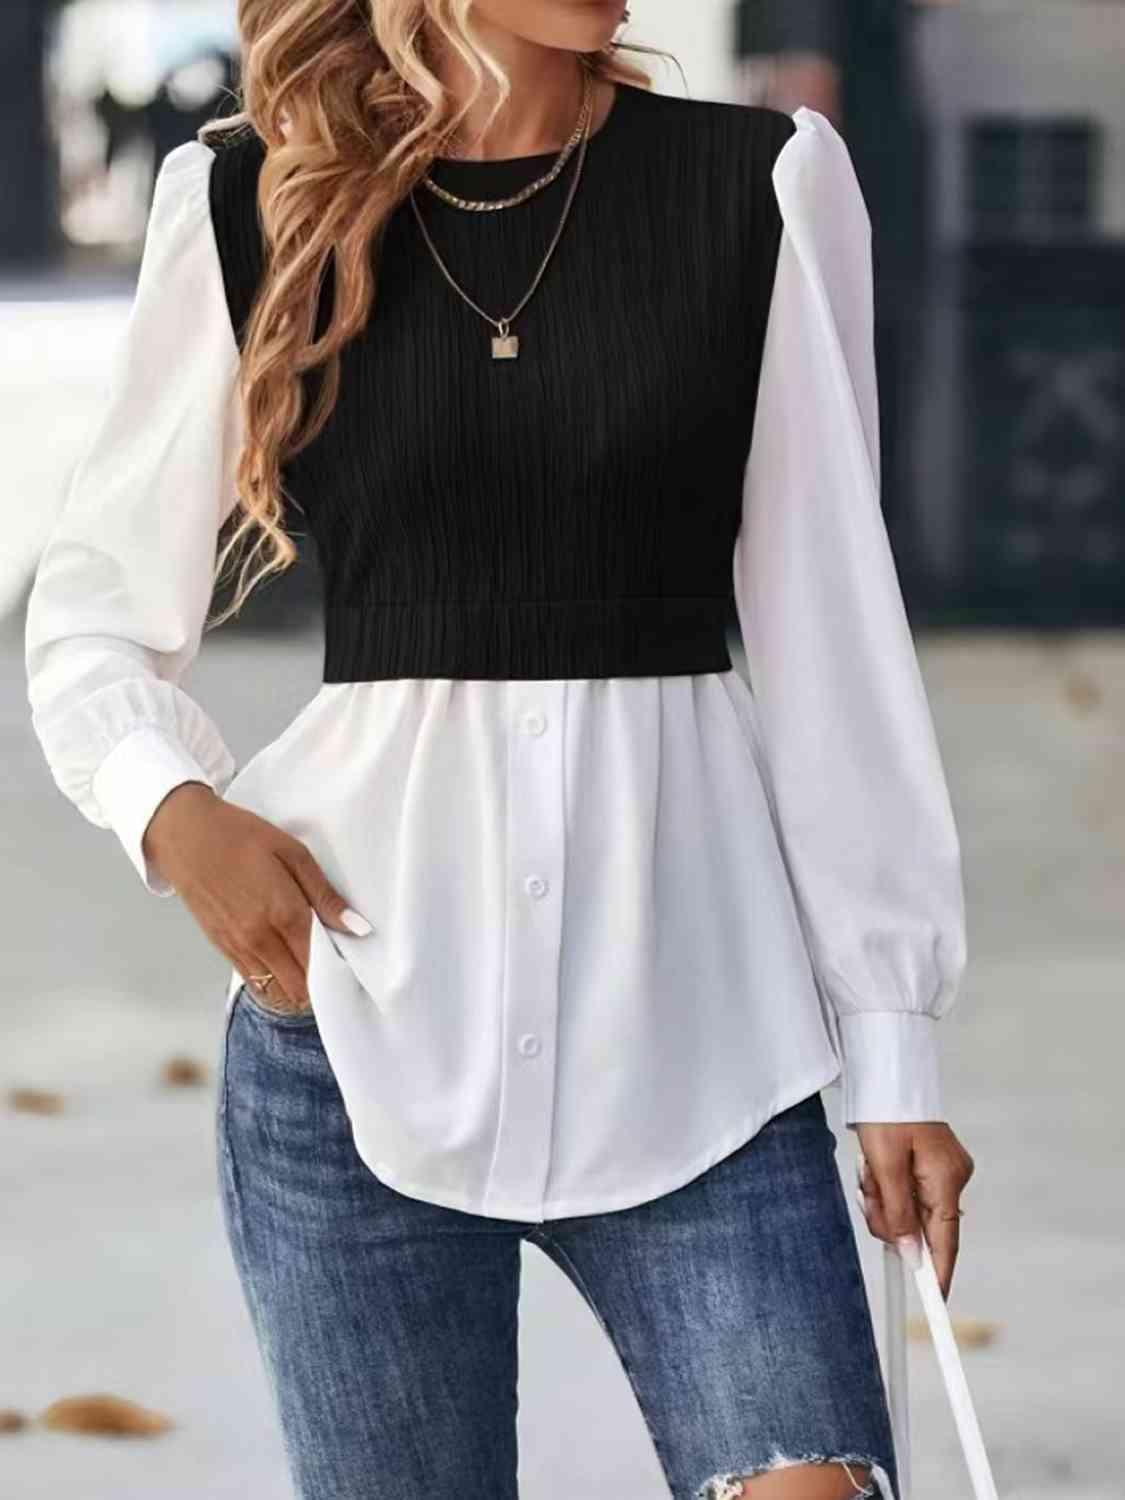 a woman wearing a black and white top and ripped jeans